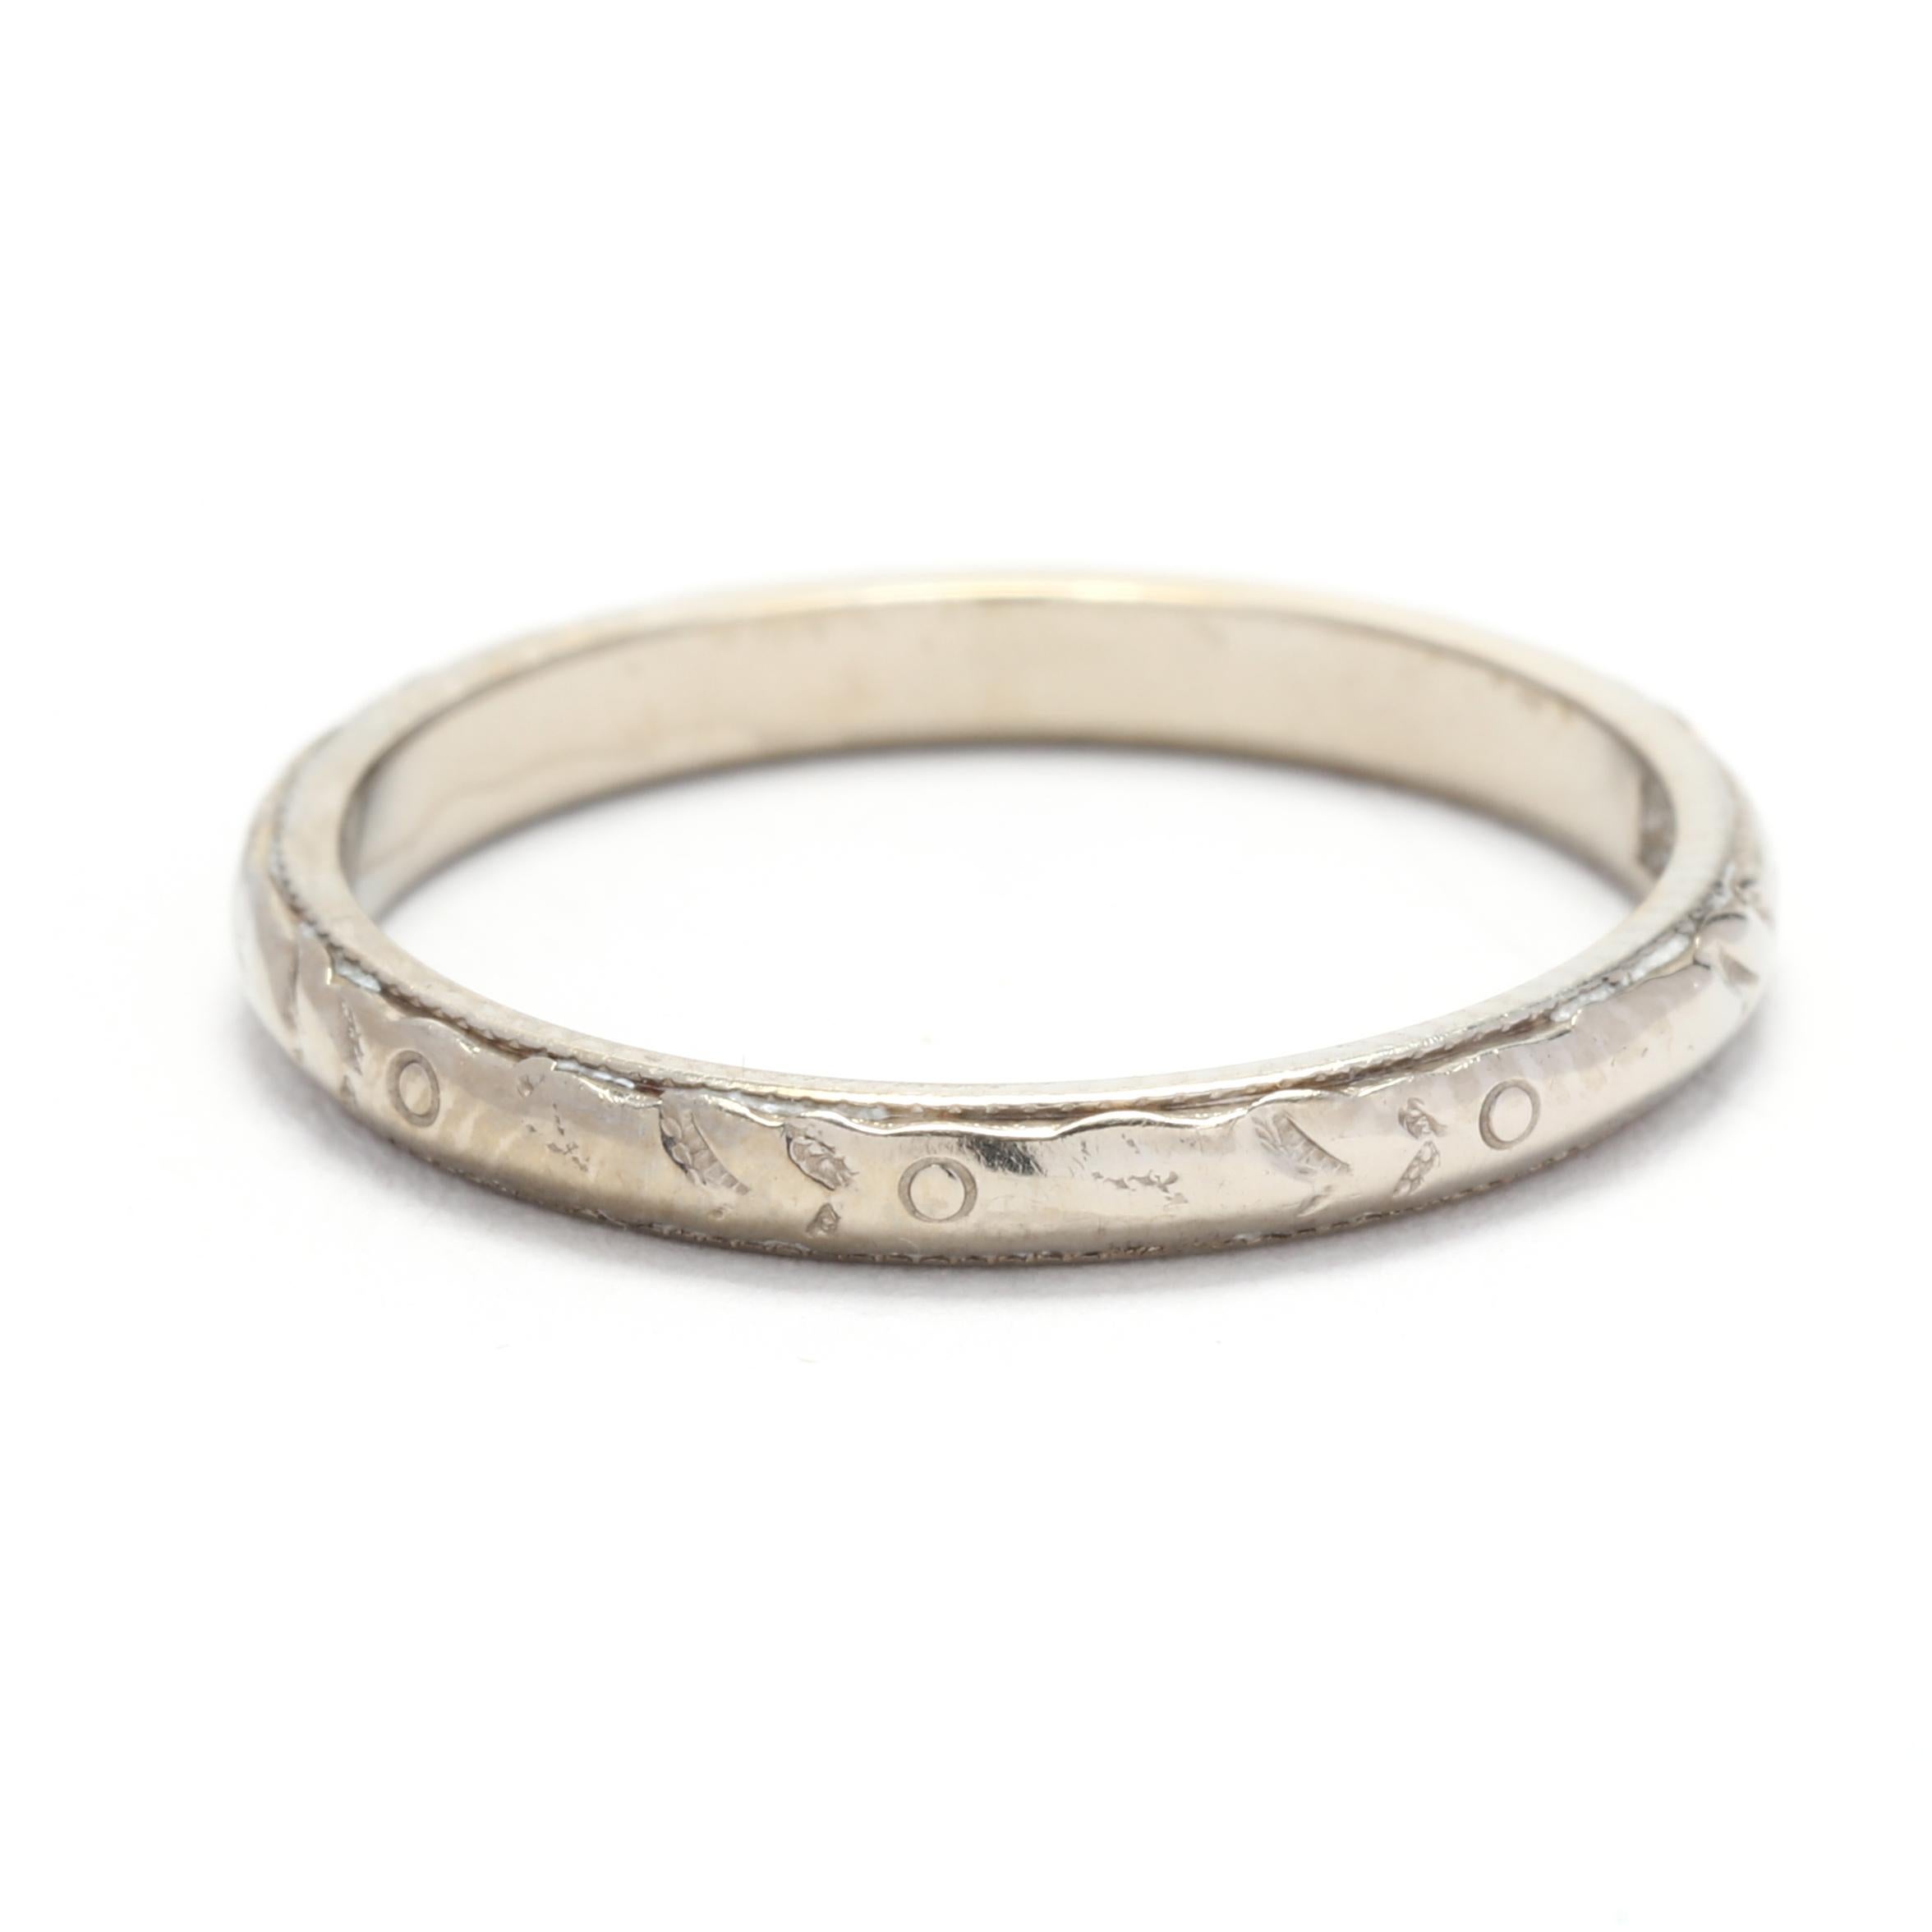 This stunning art deco floral engraved wedding band is crafted from 18k white gold. It features a delicate and intricate floral design that is both timeless and elegant. The band is a size 5.25 and can be worn alone or stacked with other rings for a